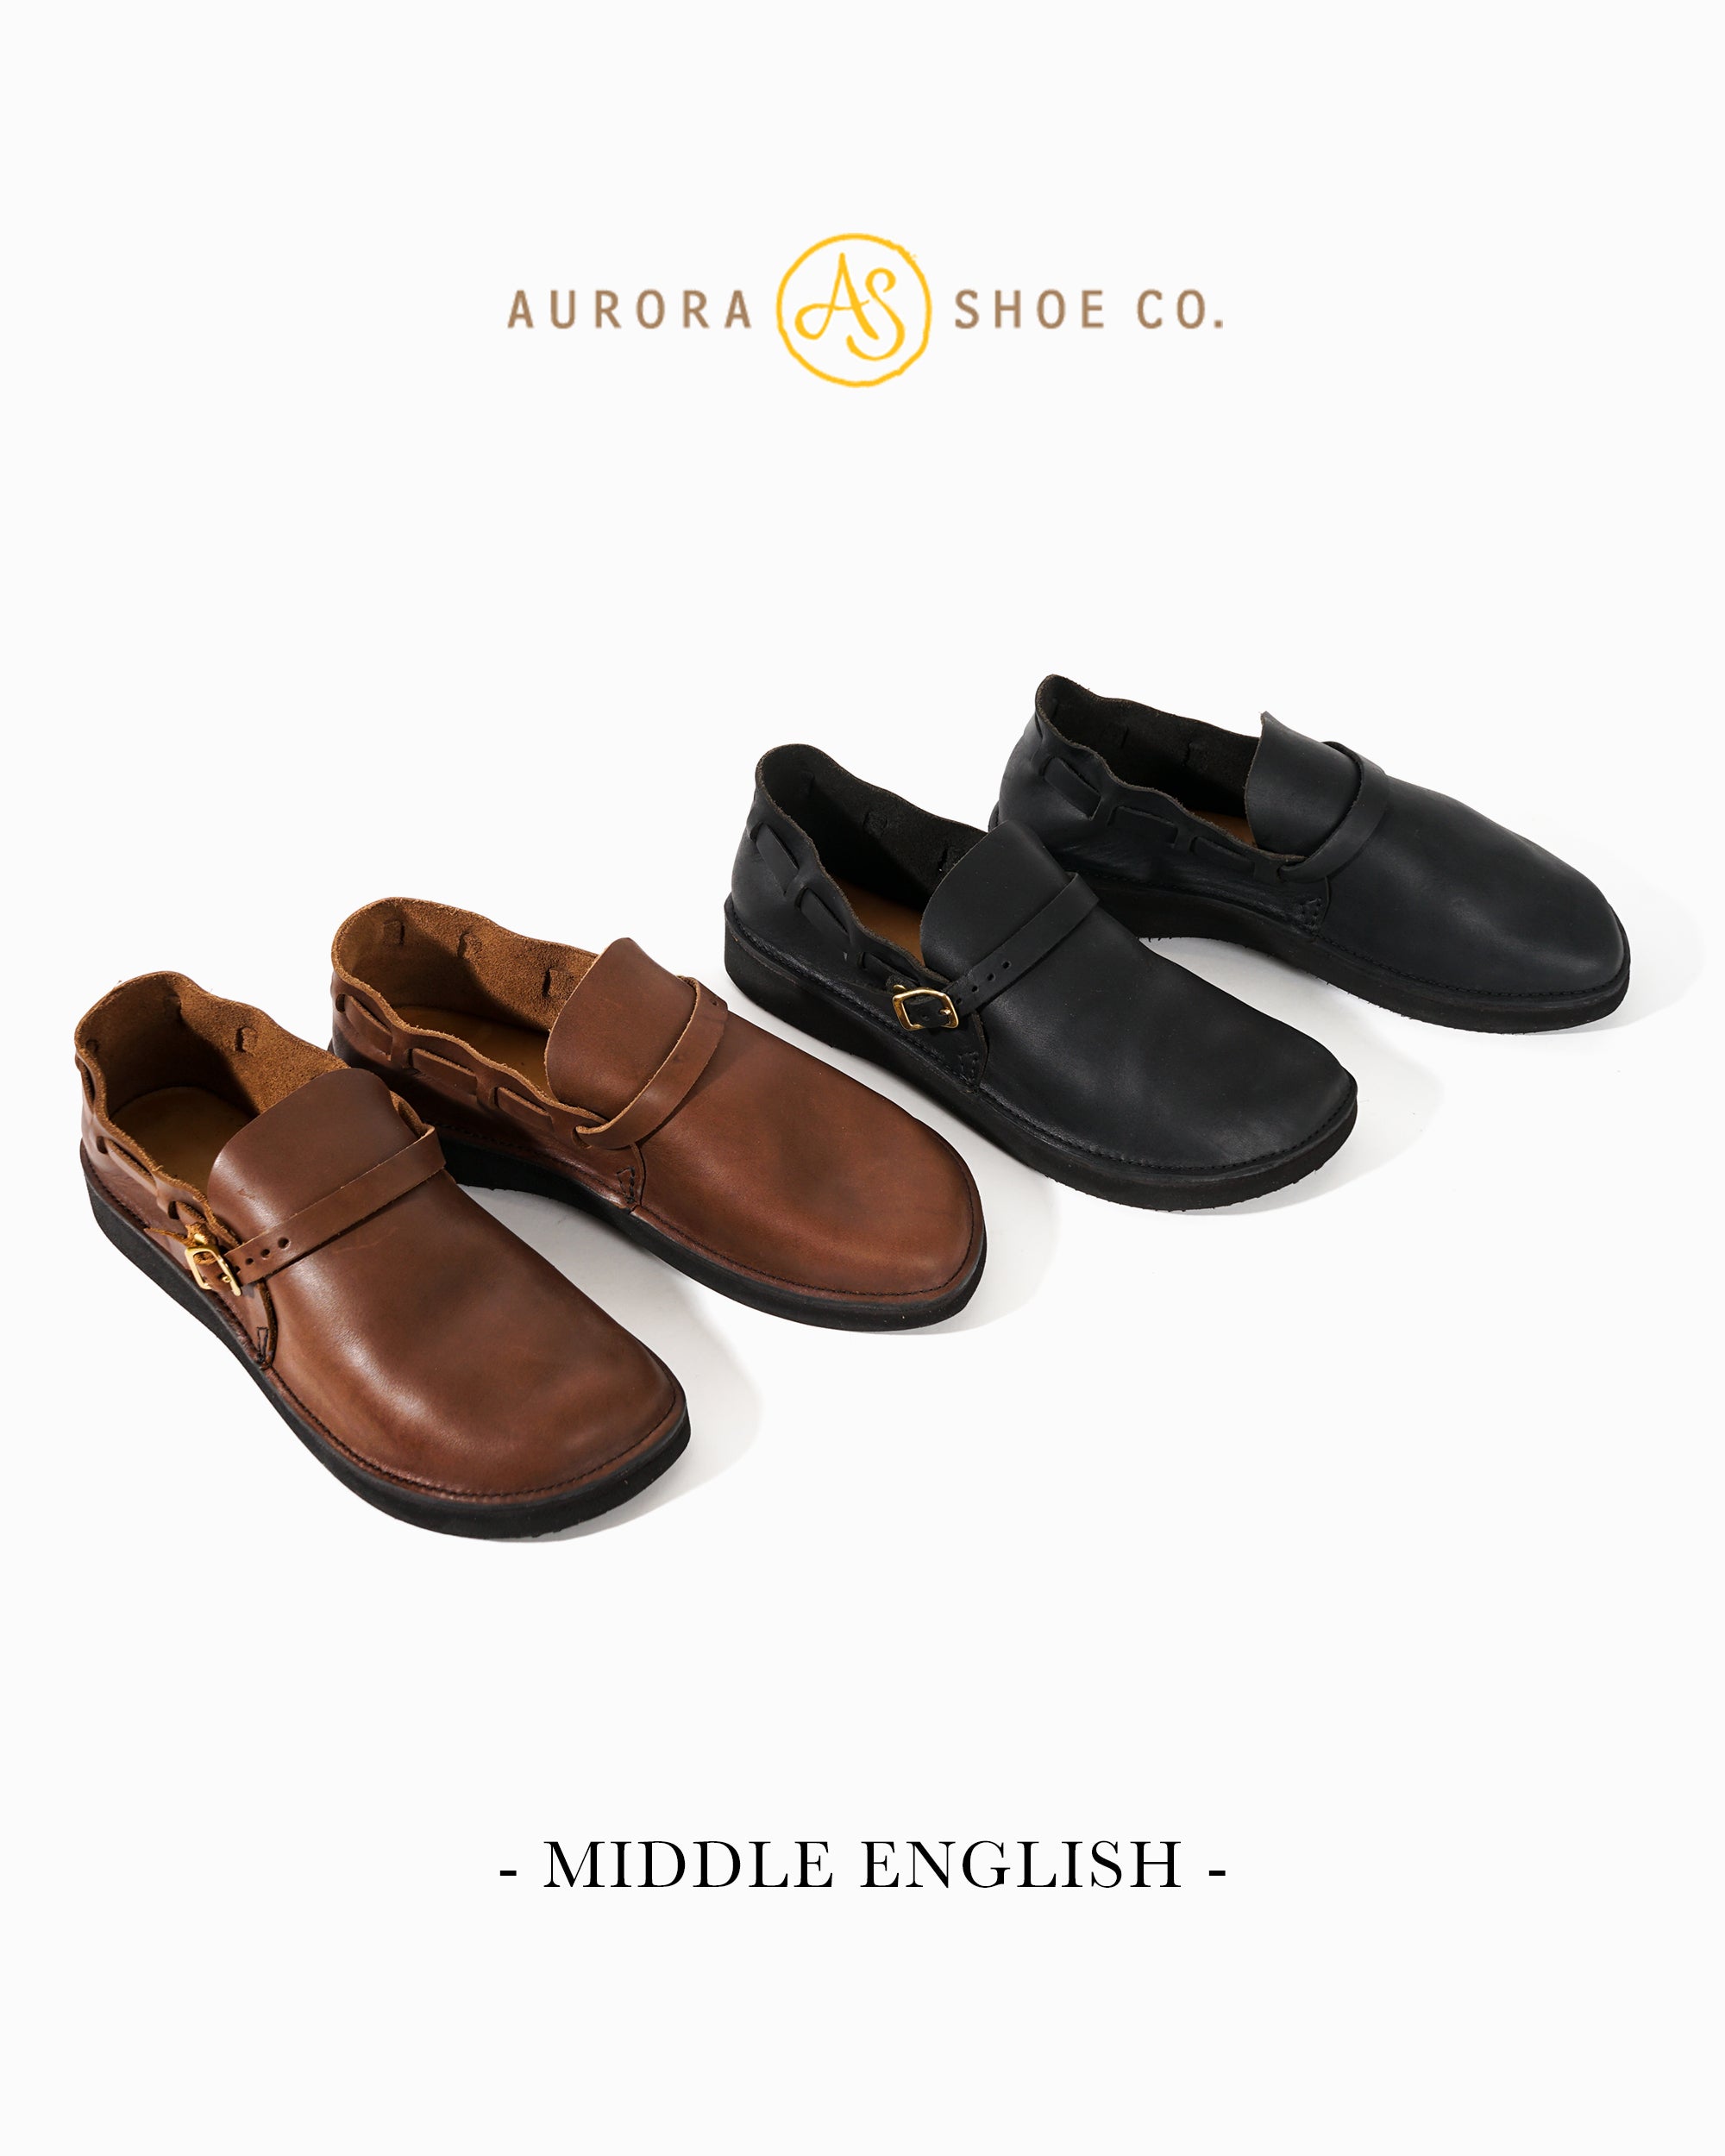 [NOW IN STOCK] AURORA SHOE CO. - MIDDLE ENGLISH